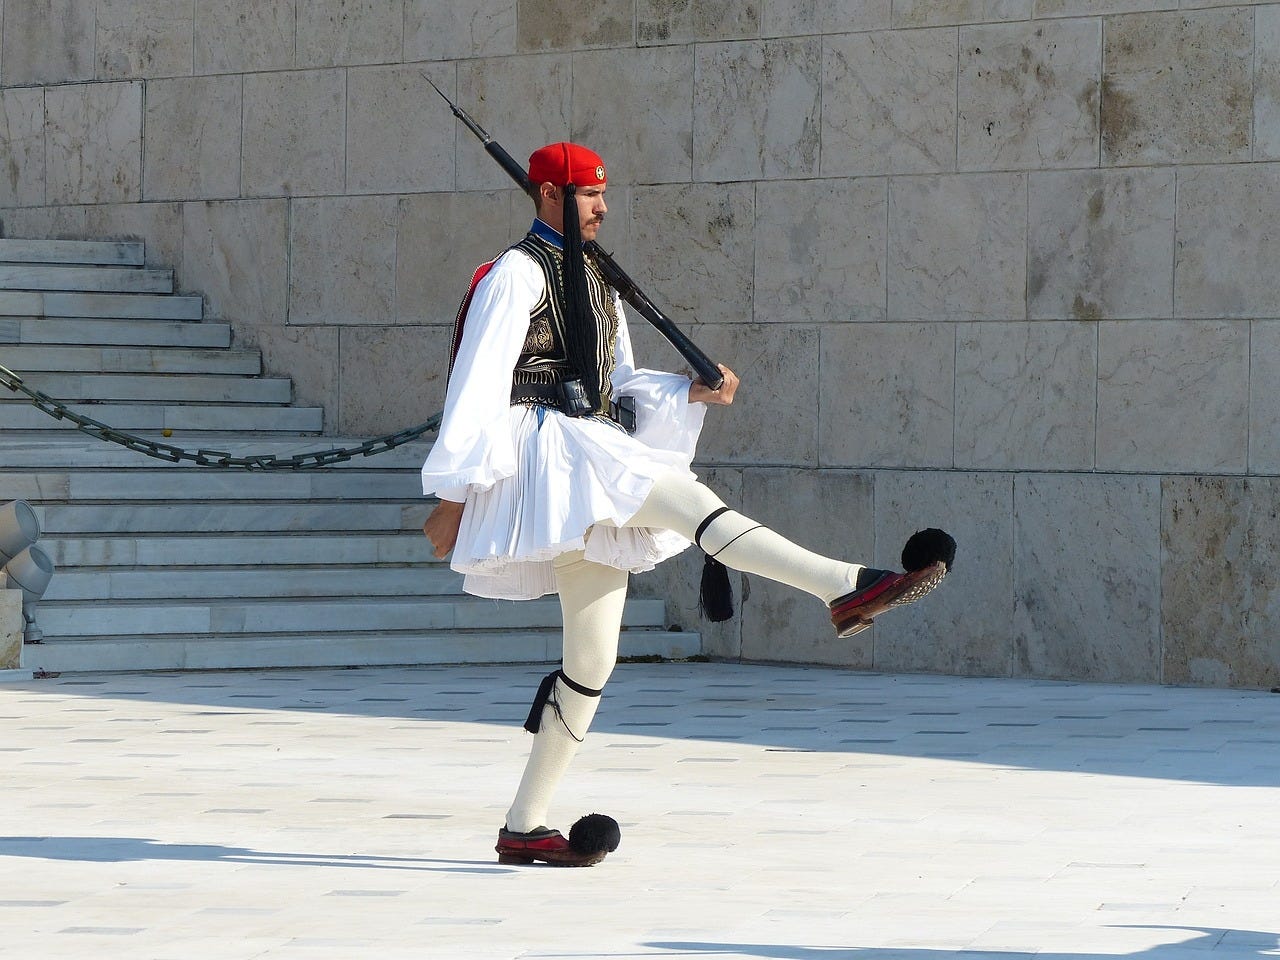 Traditional soldier-guard in Athens, Greece